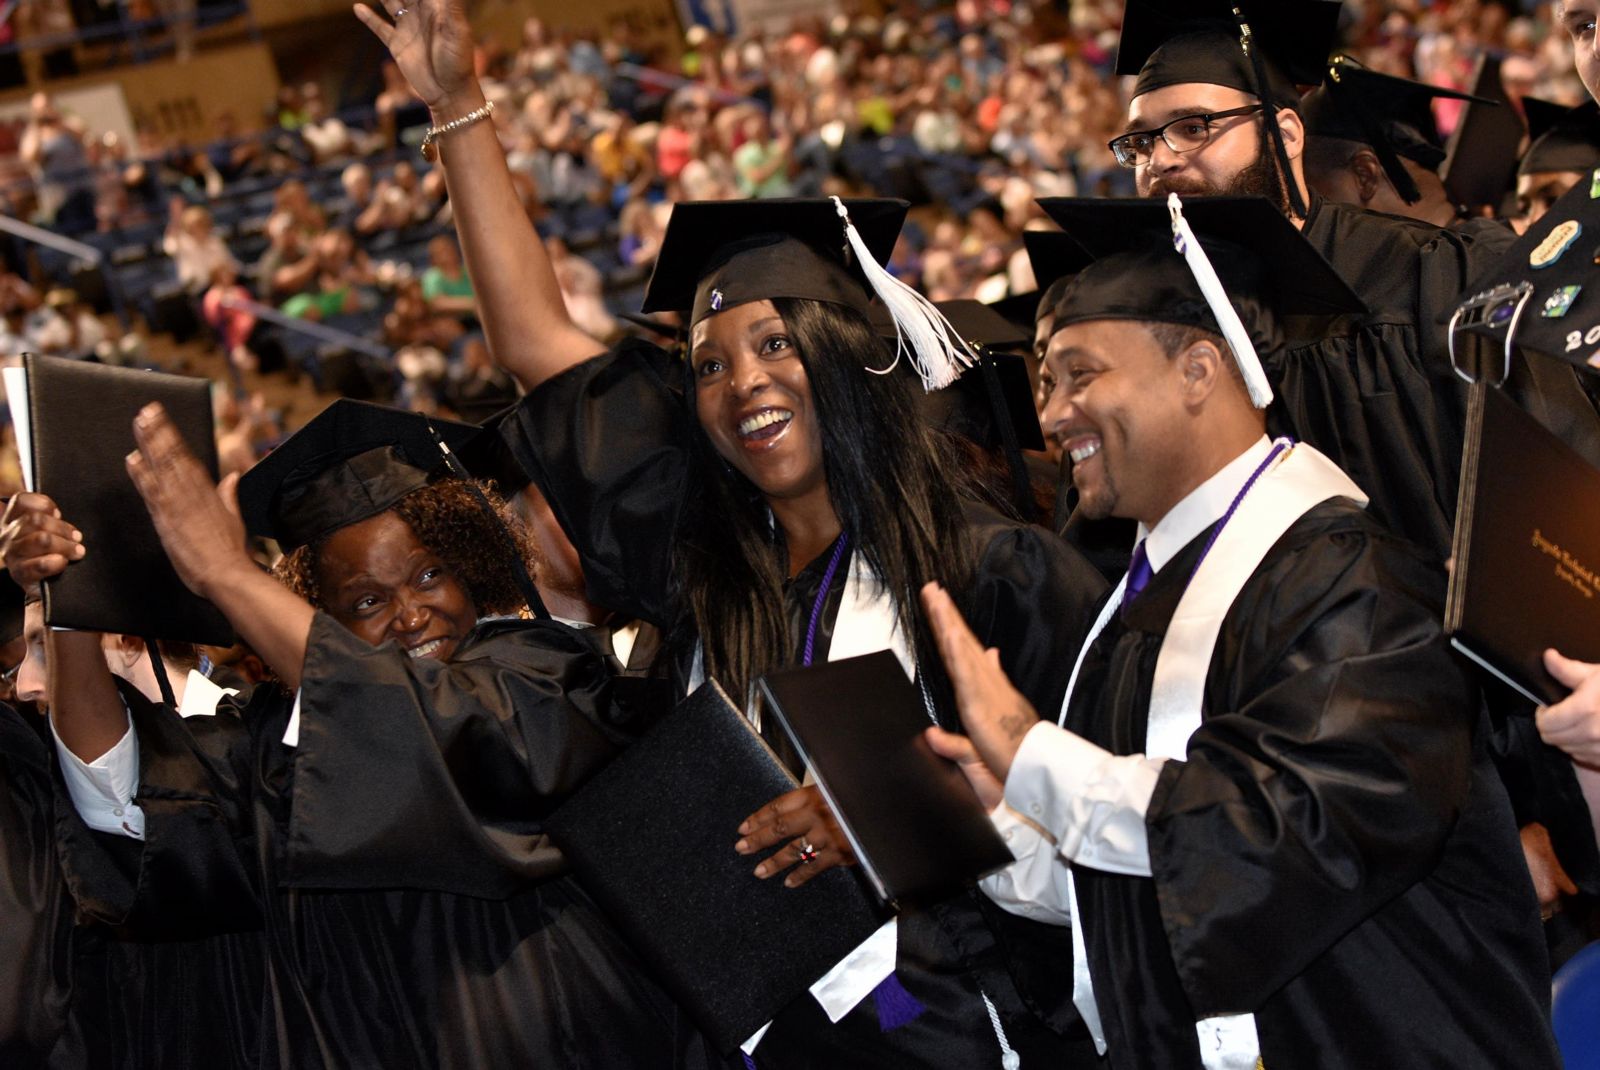 A forest green, hyperlinked, button labeled Technical Certificate of Credit in white, bolded, underlined text with an image of a crowded gathering of graduates and family focusing on four graduates wearing black graduate caps and gowns with white tassels and stoles: an African American female smiles while holding a black diploma/degree holder up with her left hand placed on the side, to her left an African American female smiles and raises her right hand wearing a metal bracelet while holding her black degree/diploma holder in her left hand, an African American male stand smiling and holding his black diploma/degree holder in his right hand with his left hand held up behind it, and a Caucasian male with a  black beard and glasses stands behind and to the right of those three.